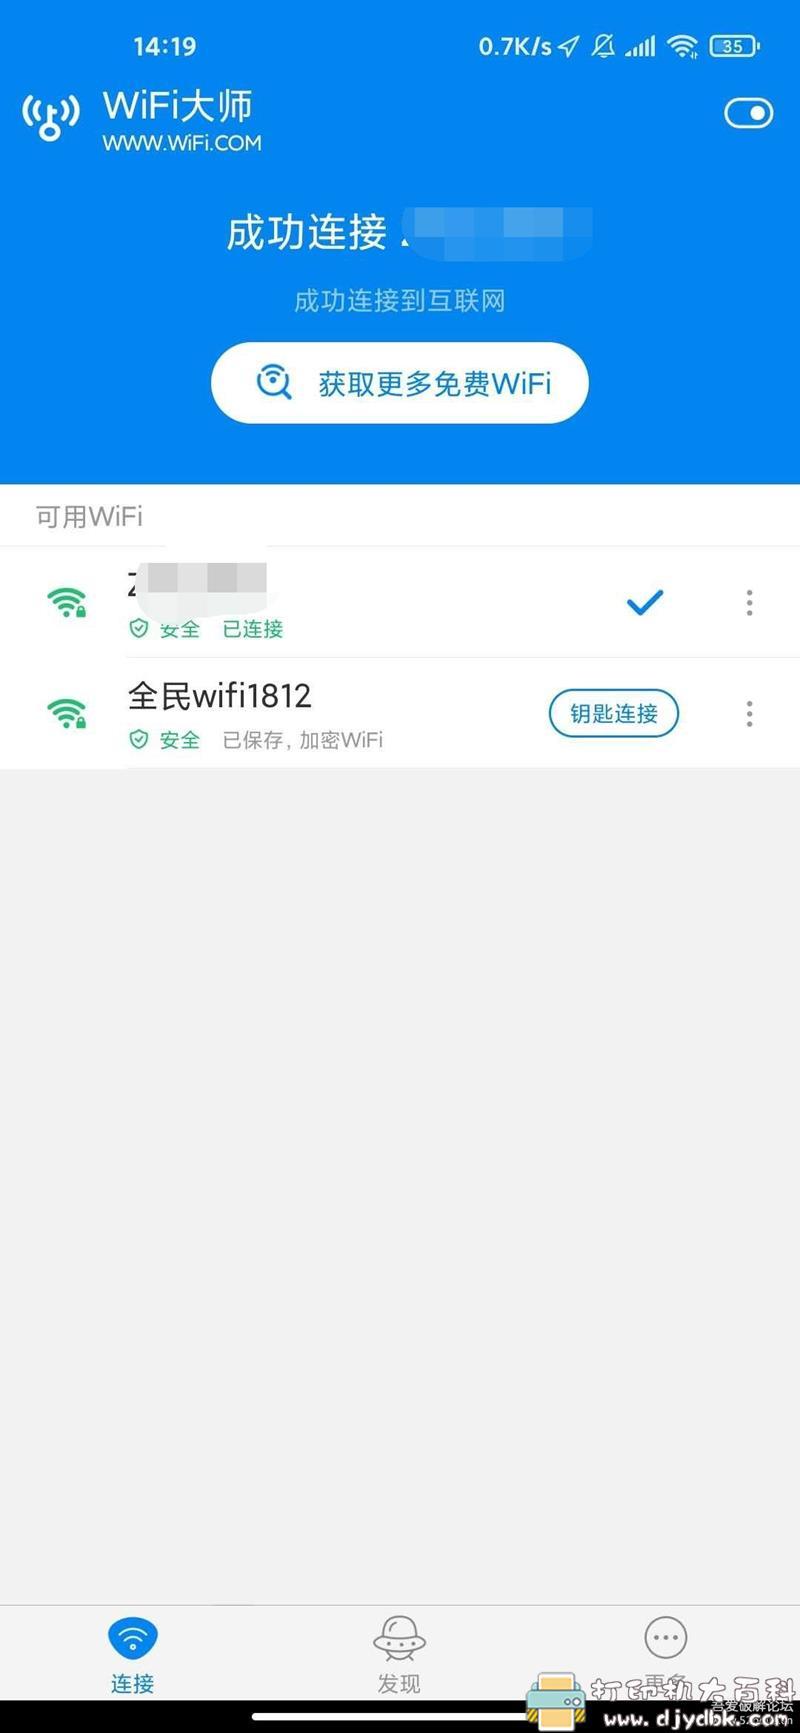 [Android]WIFI大师 v4.7.77.0 for Google Play 无广告版 配图 No.1